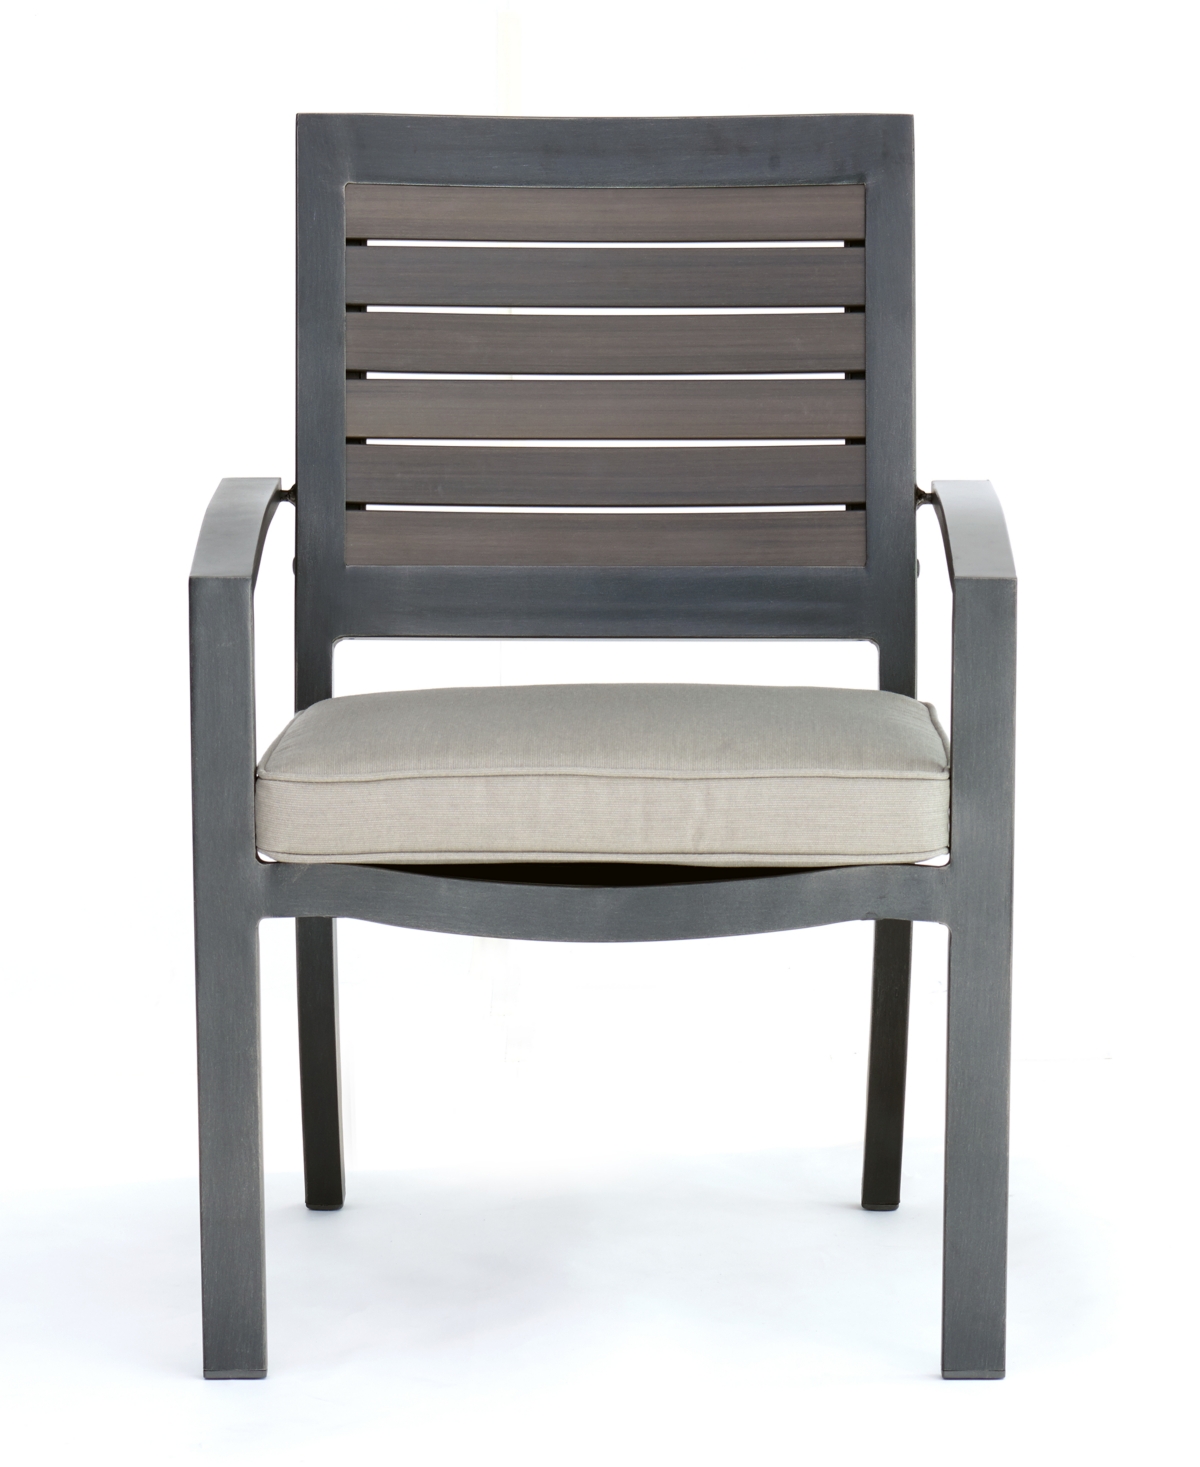 Agio Set Of 6 Marlough Ii Aluminum Outdoor Dining Chairs, Created For Macy's In Outdura Storm Smoke